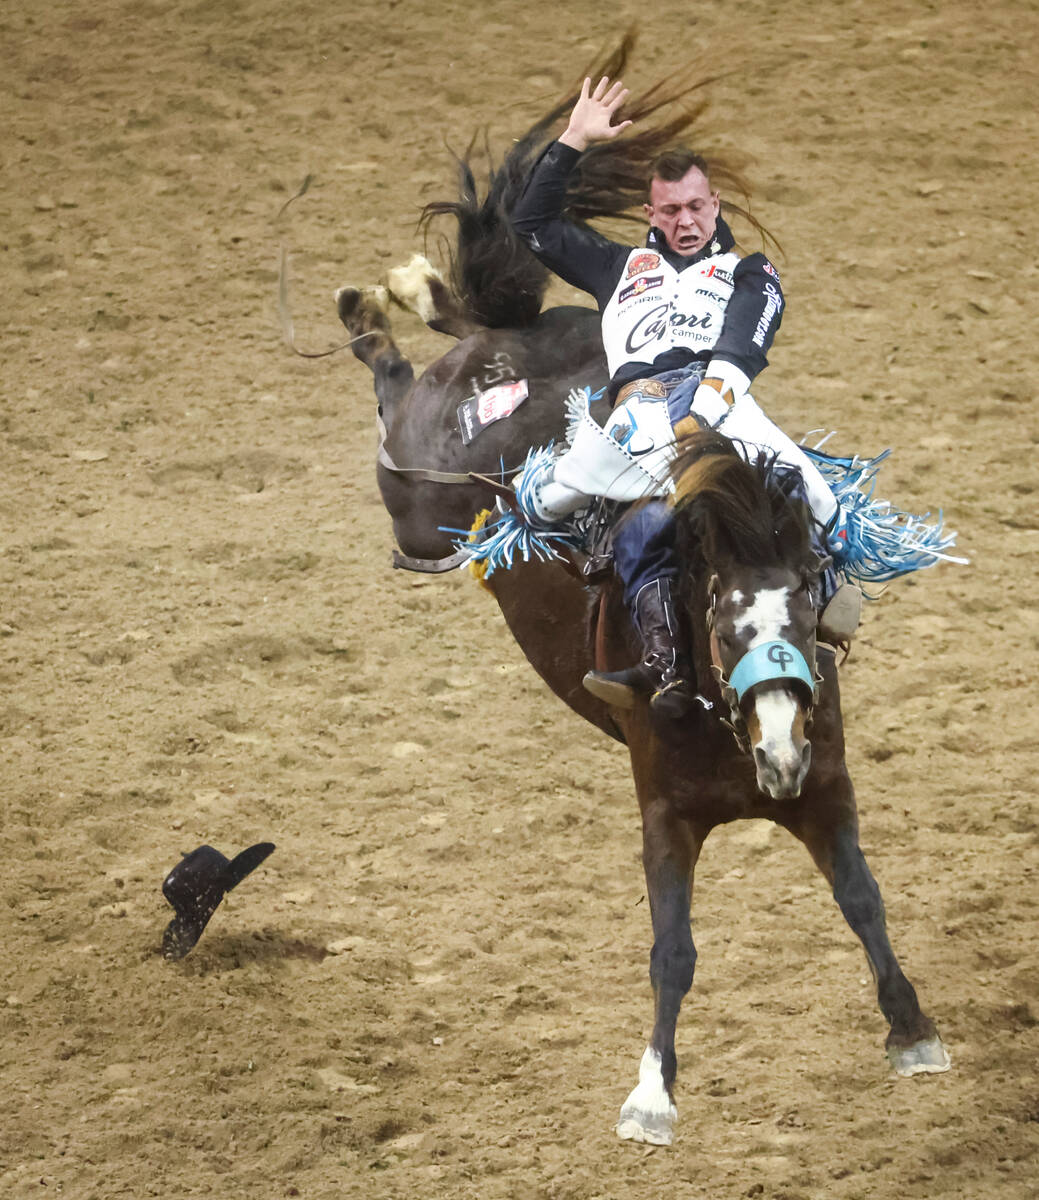 Tim O’Connell, of Zwingle, Iowa, competes in bareback riding during the first night of t ...